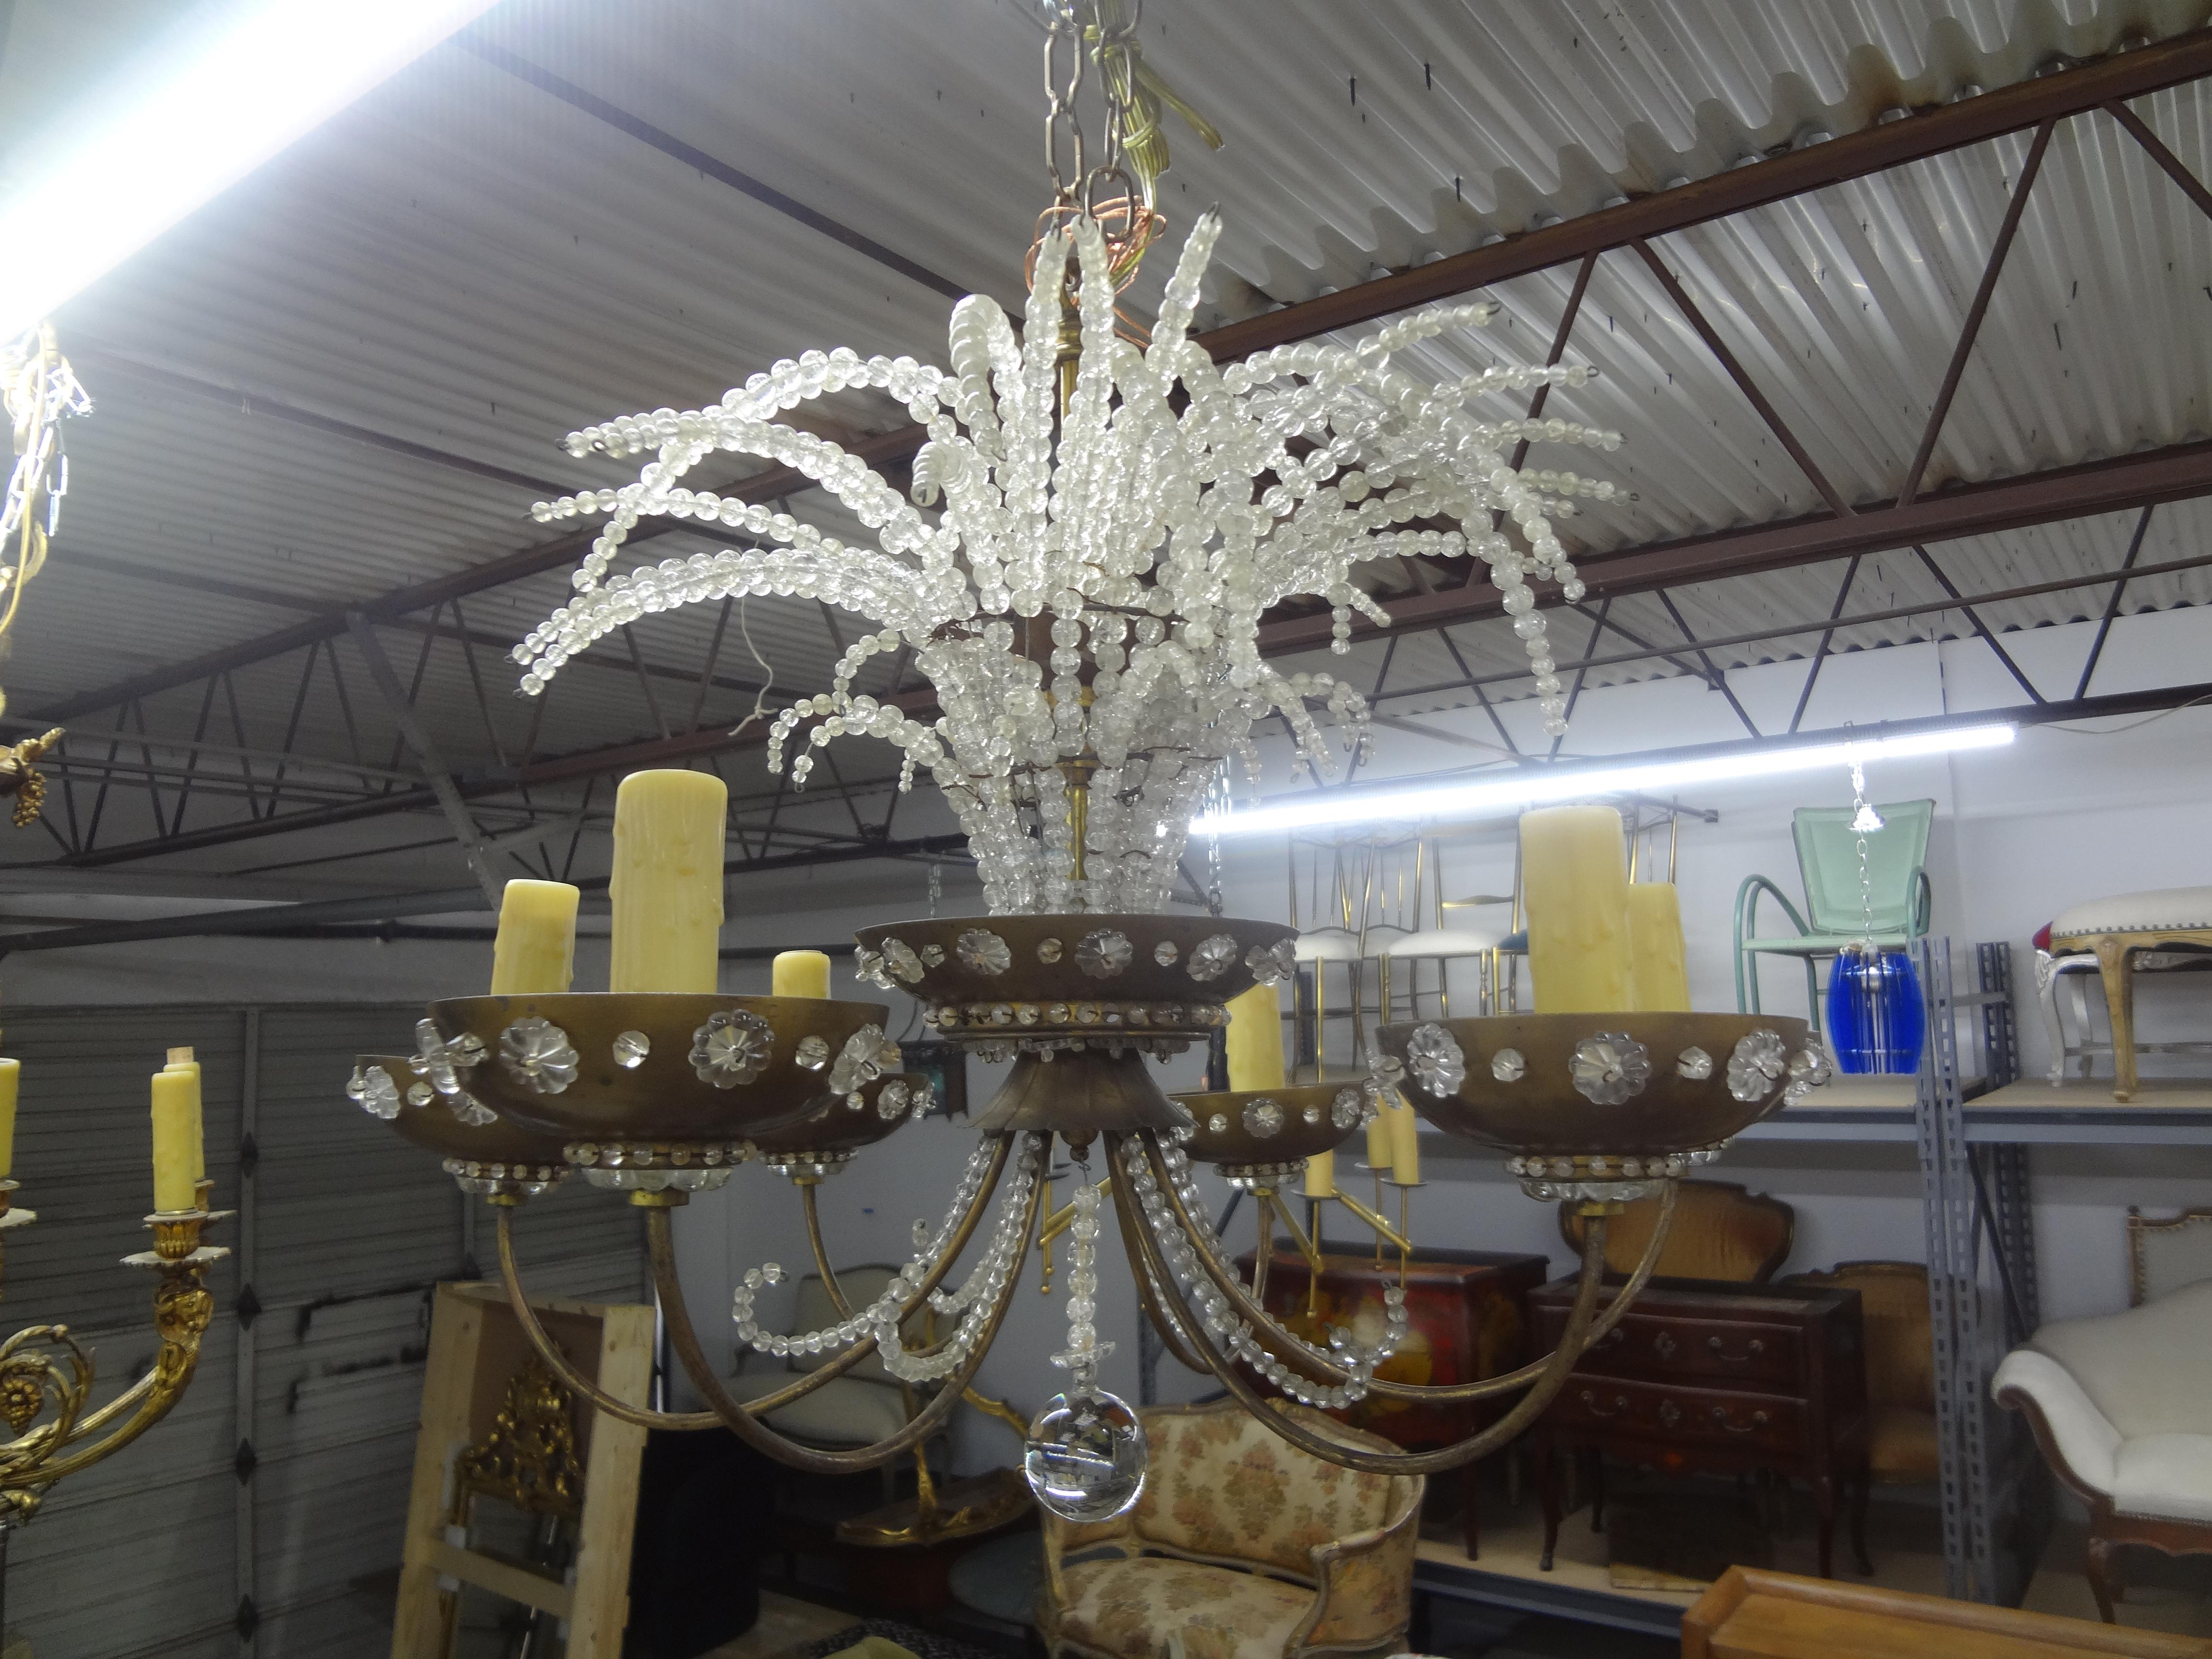 French Maison Bagues Beaded Crystal Chandelier.
This stunning French crystal chandelier has 6 arms, crystal embellished bobeches with candelabra sockets and sprays of crystal beads at the top.
Newly wired for the U.S. market with new sockets and